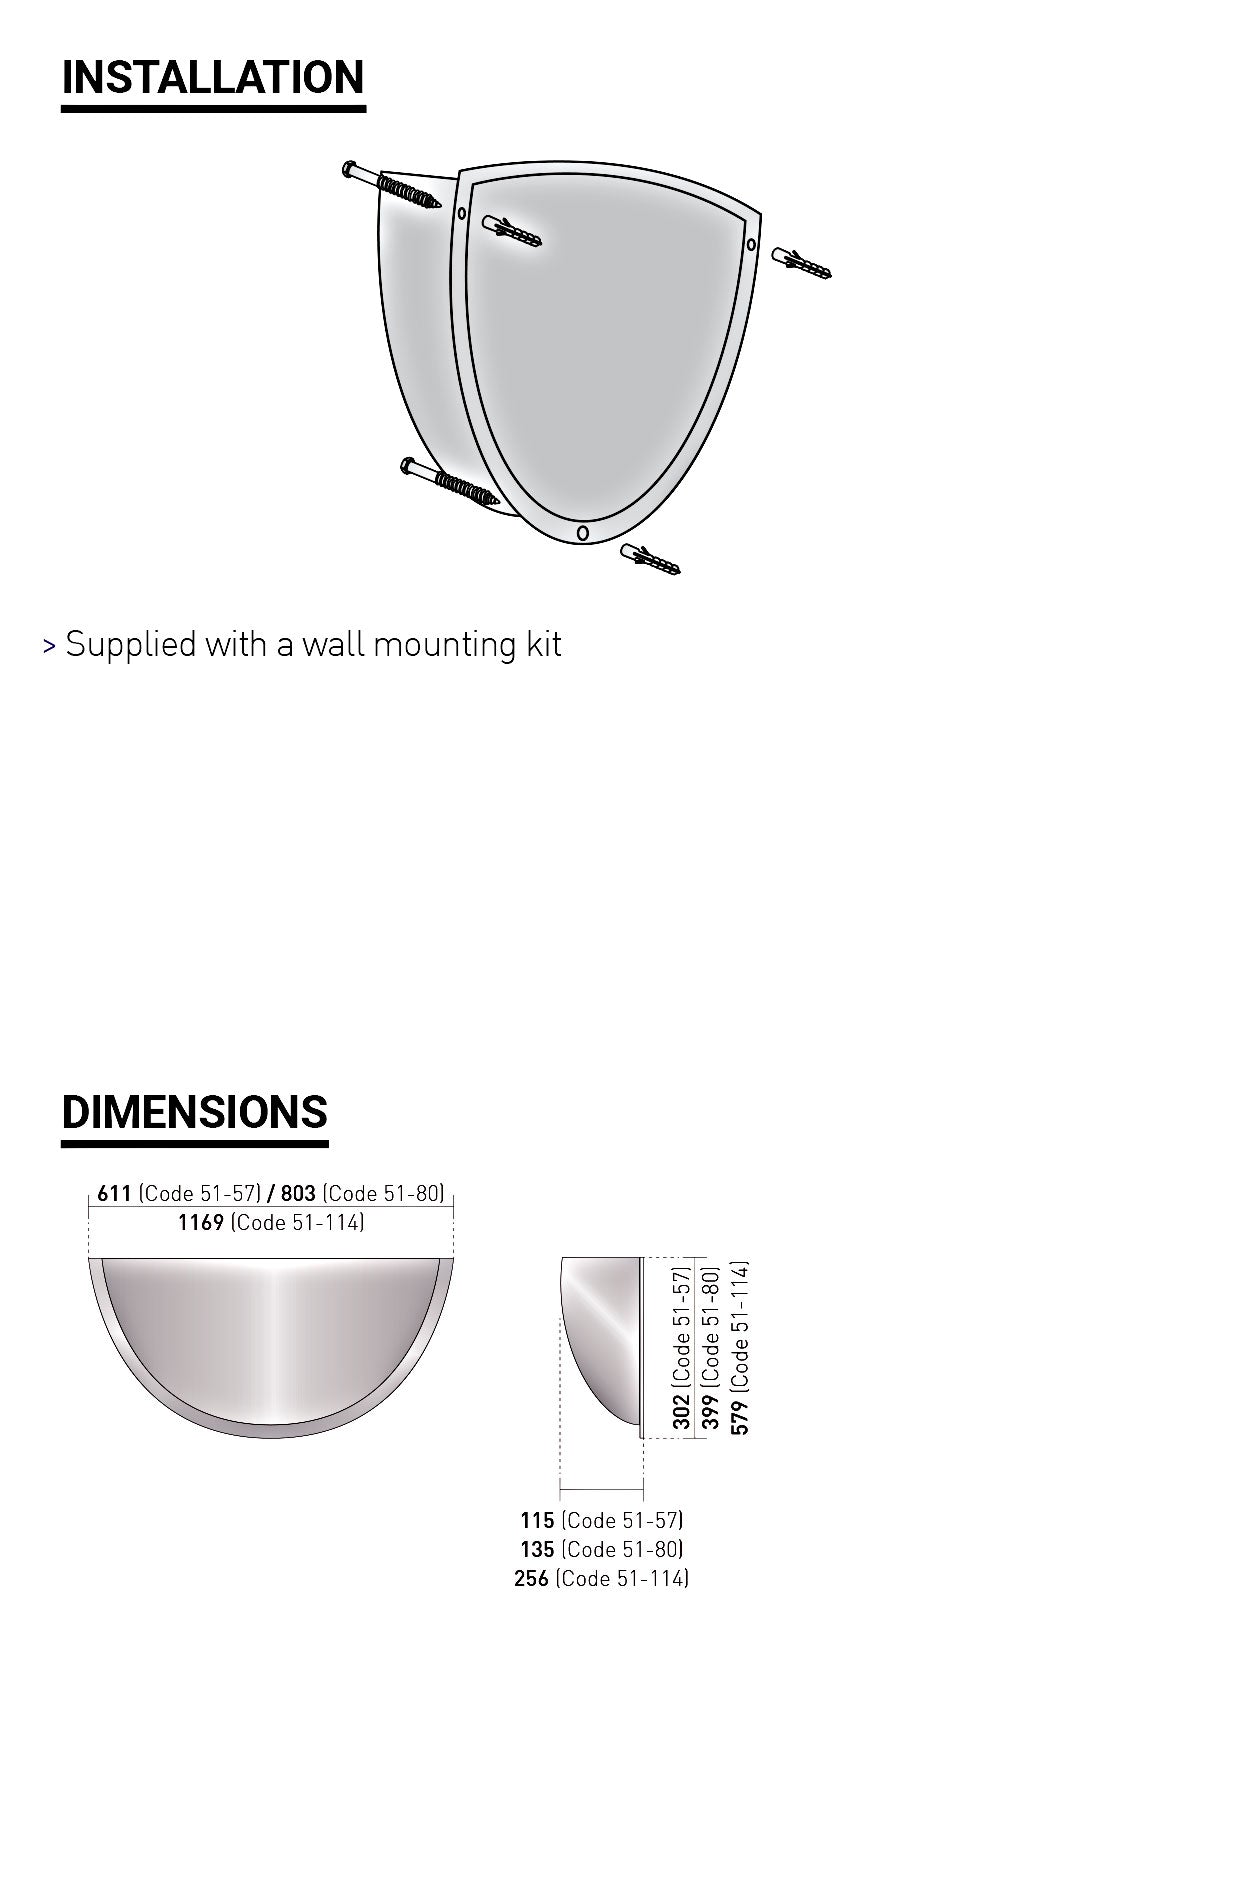 1/4 Sphere Mirrors Enhancing Traffic Control and Safety in Industrial Environments